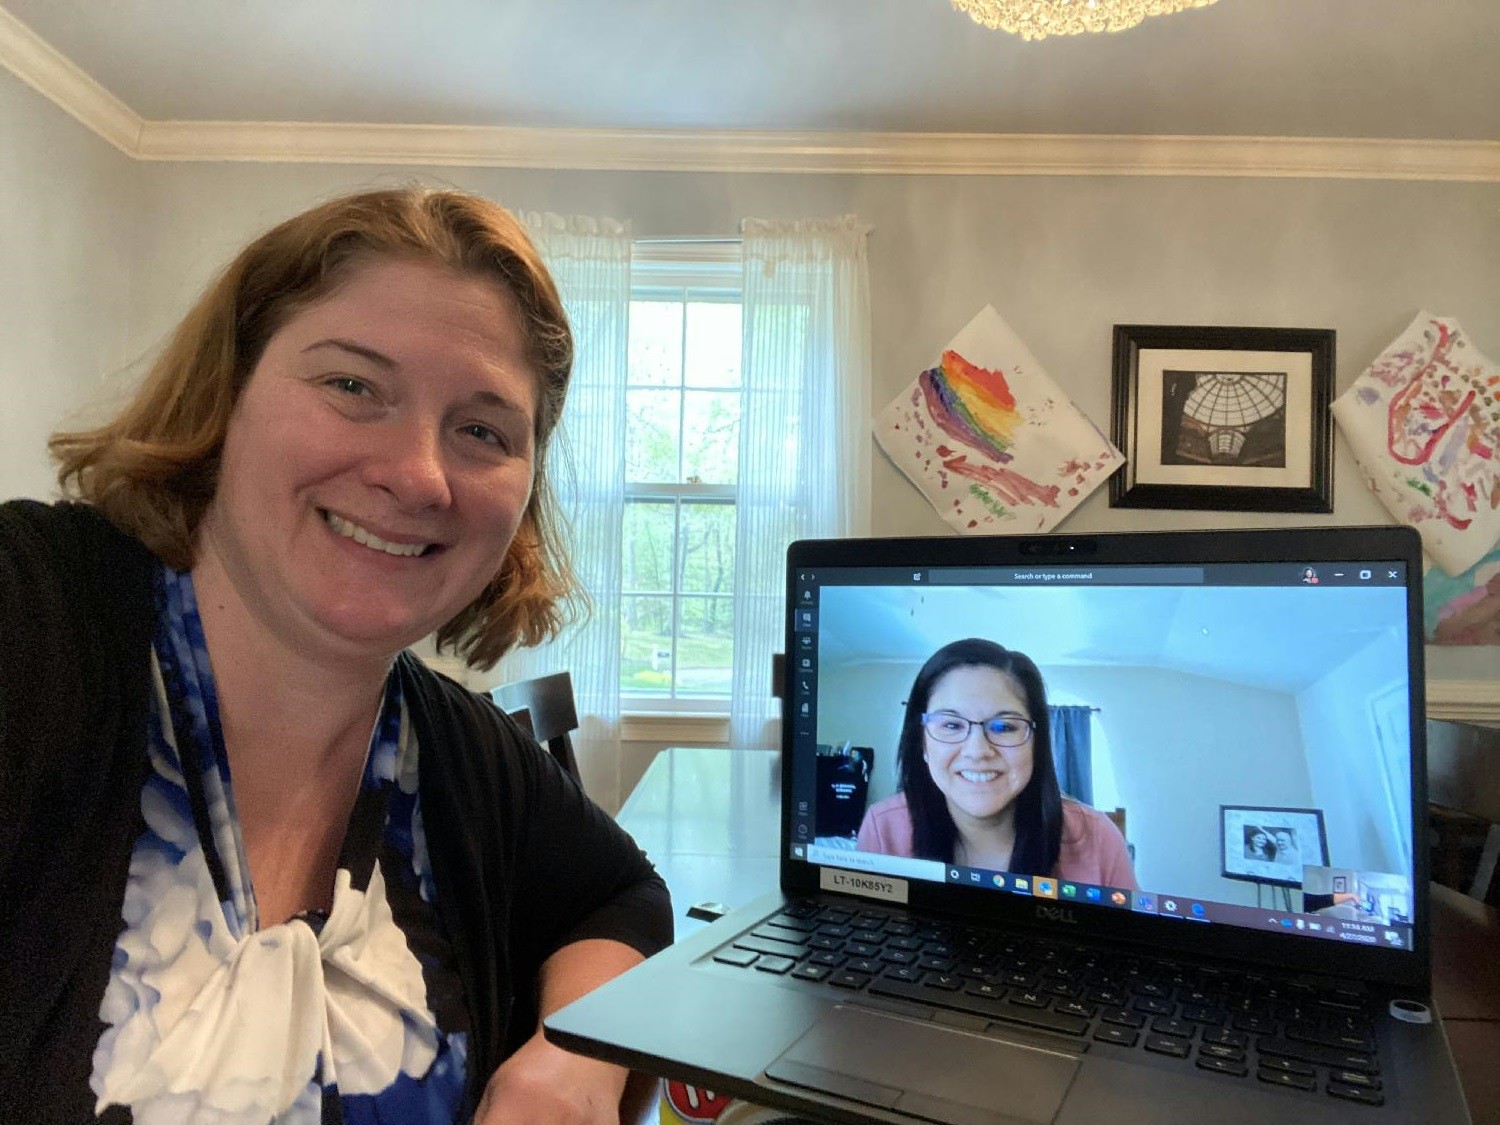 Connection is key at ACT1! Even in a telework setting, employees stayed connected & committed to teamwork.